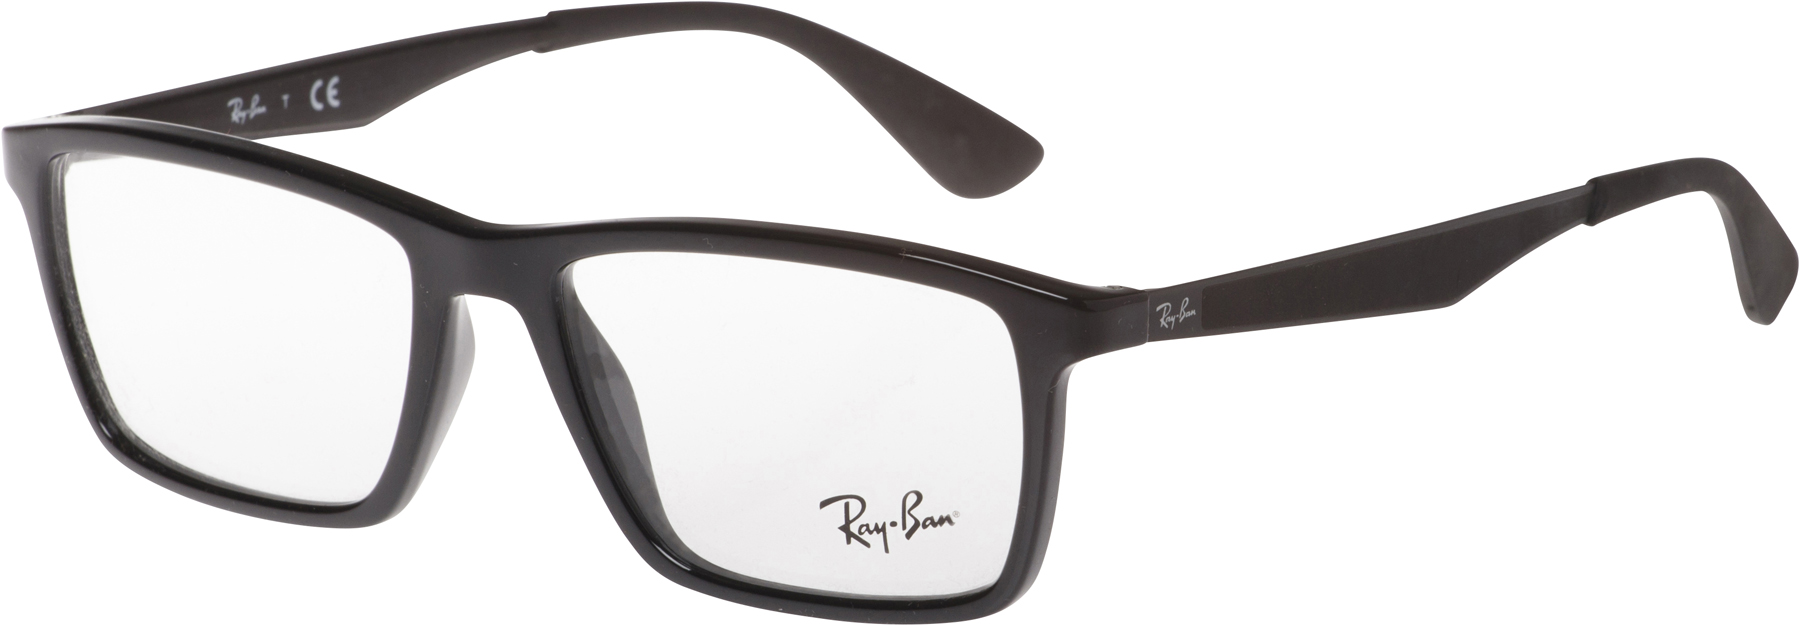 Ray-Ban 7056 image number null